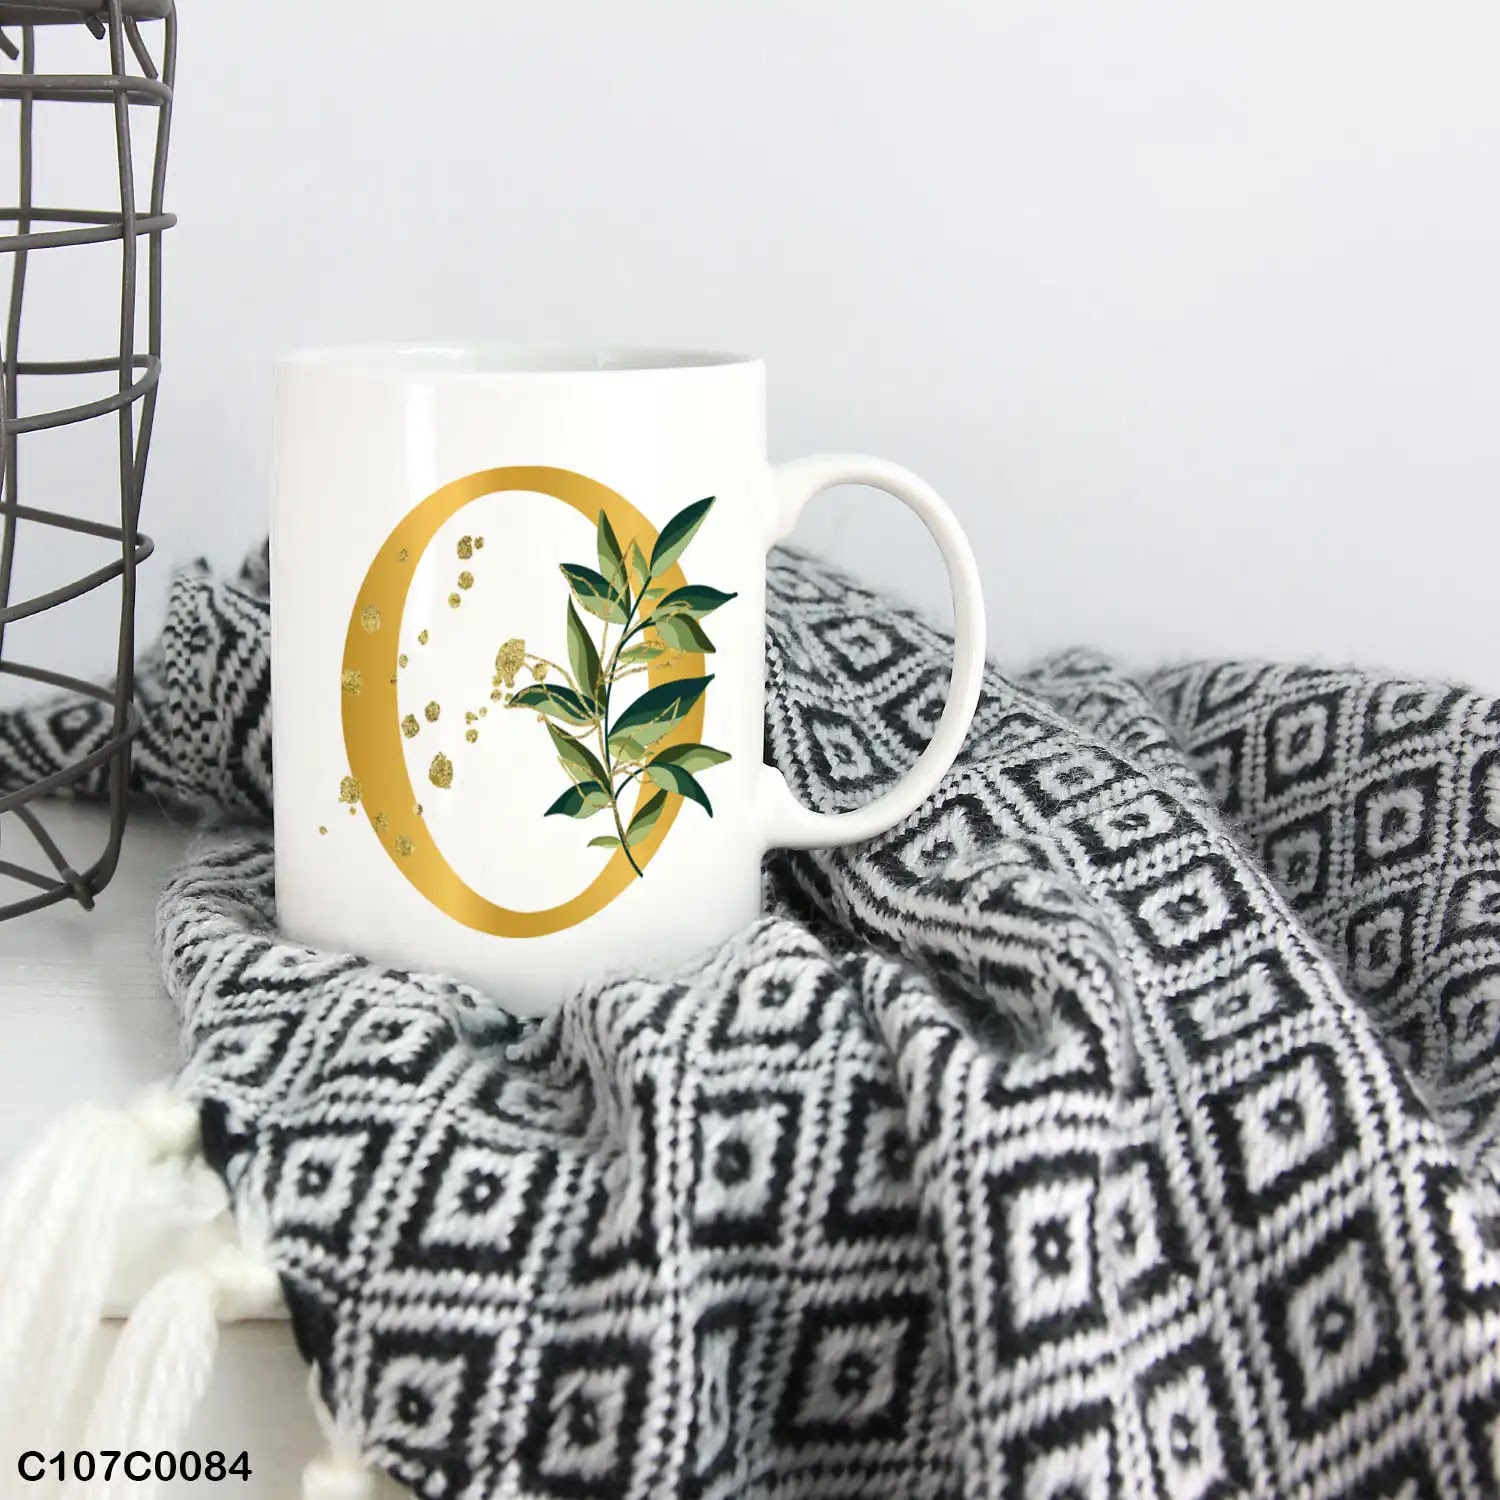 A white mug (cup) printed with gold Letter "O" and small green branch